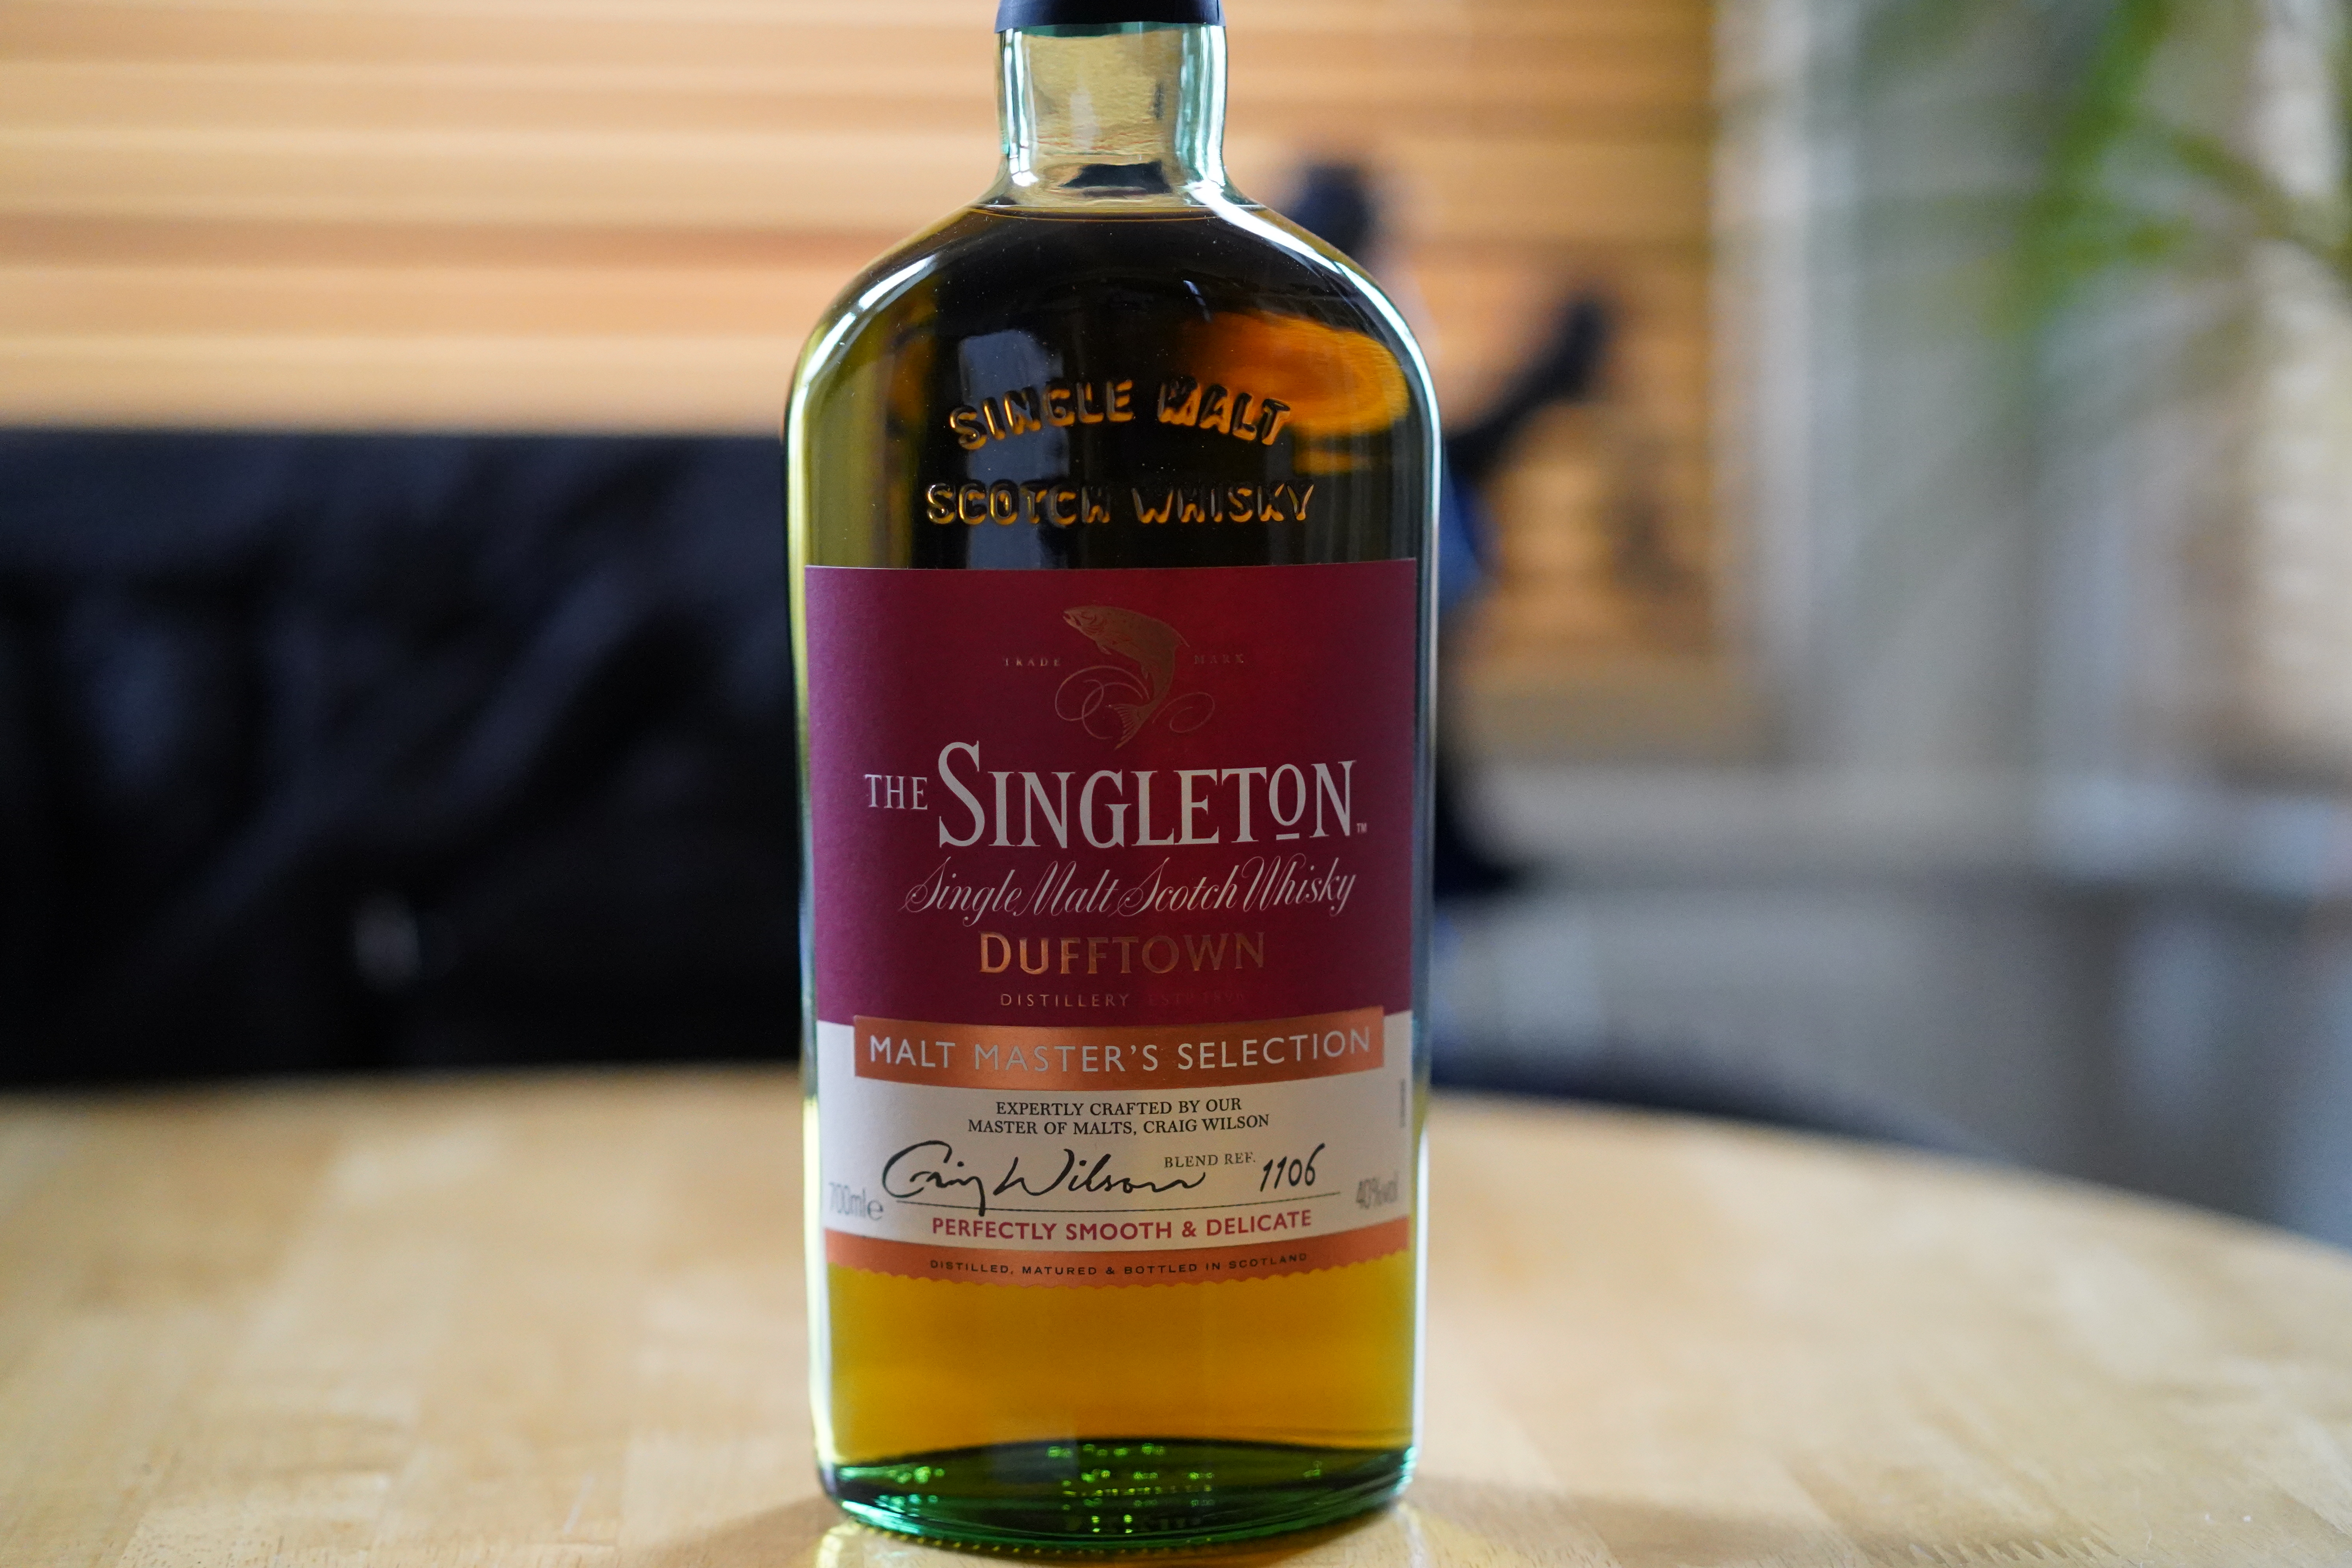 New Year calls for New Whisky from The Singleton 